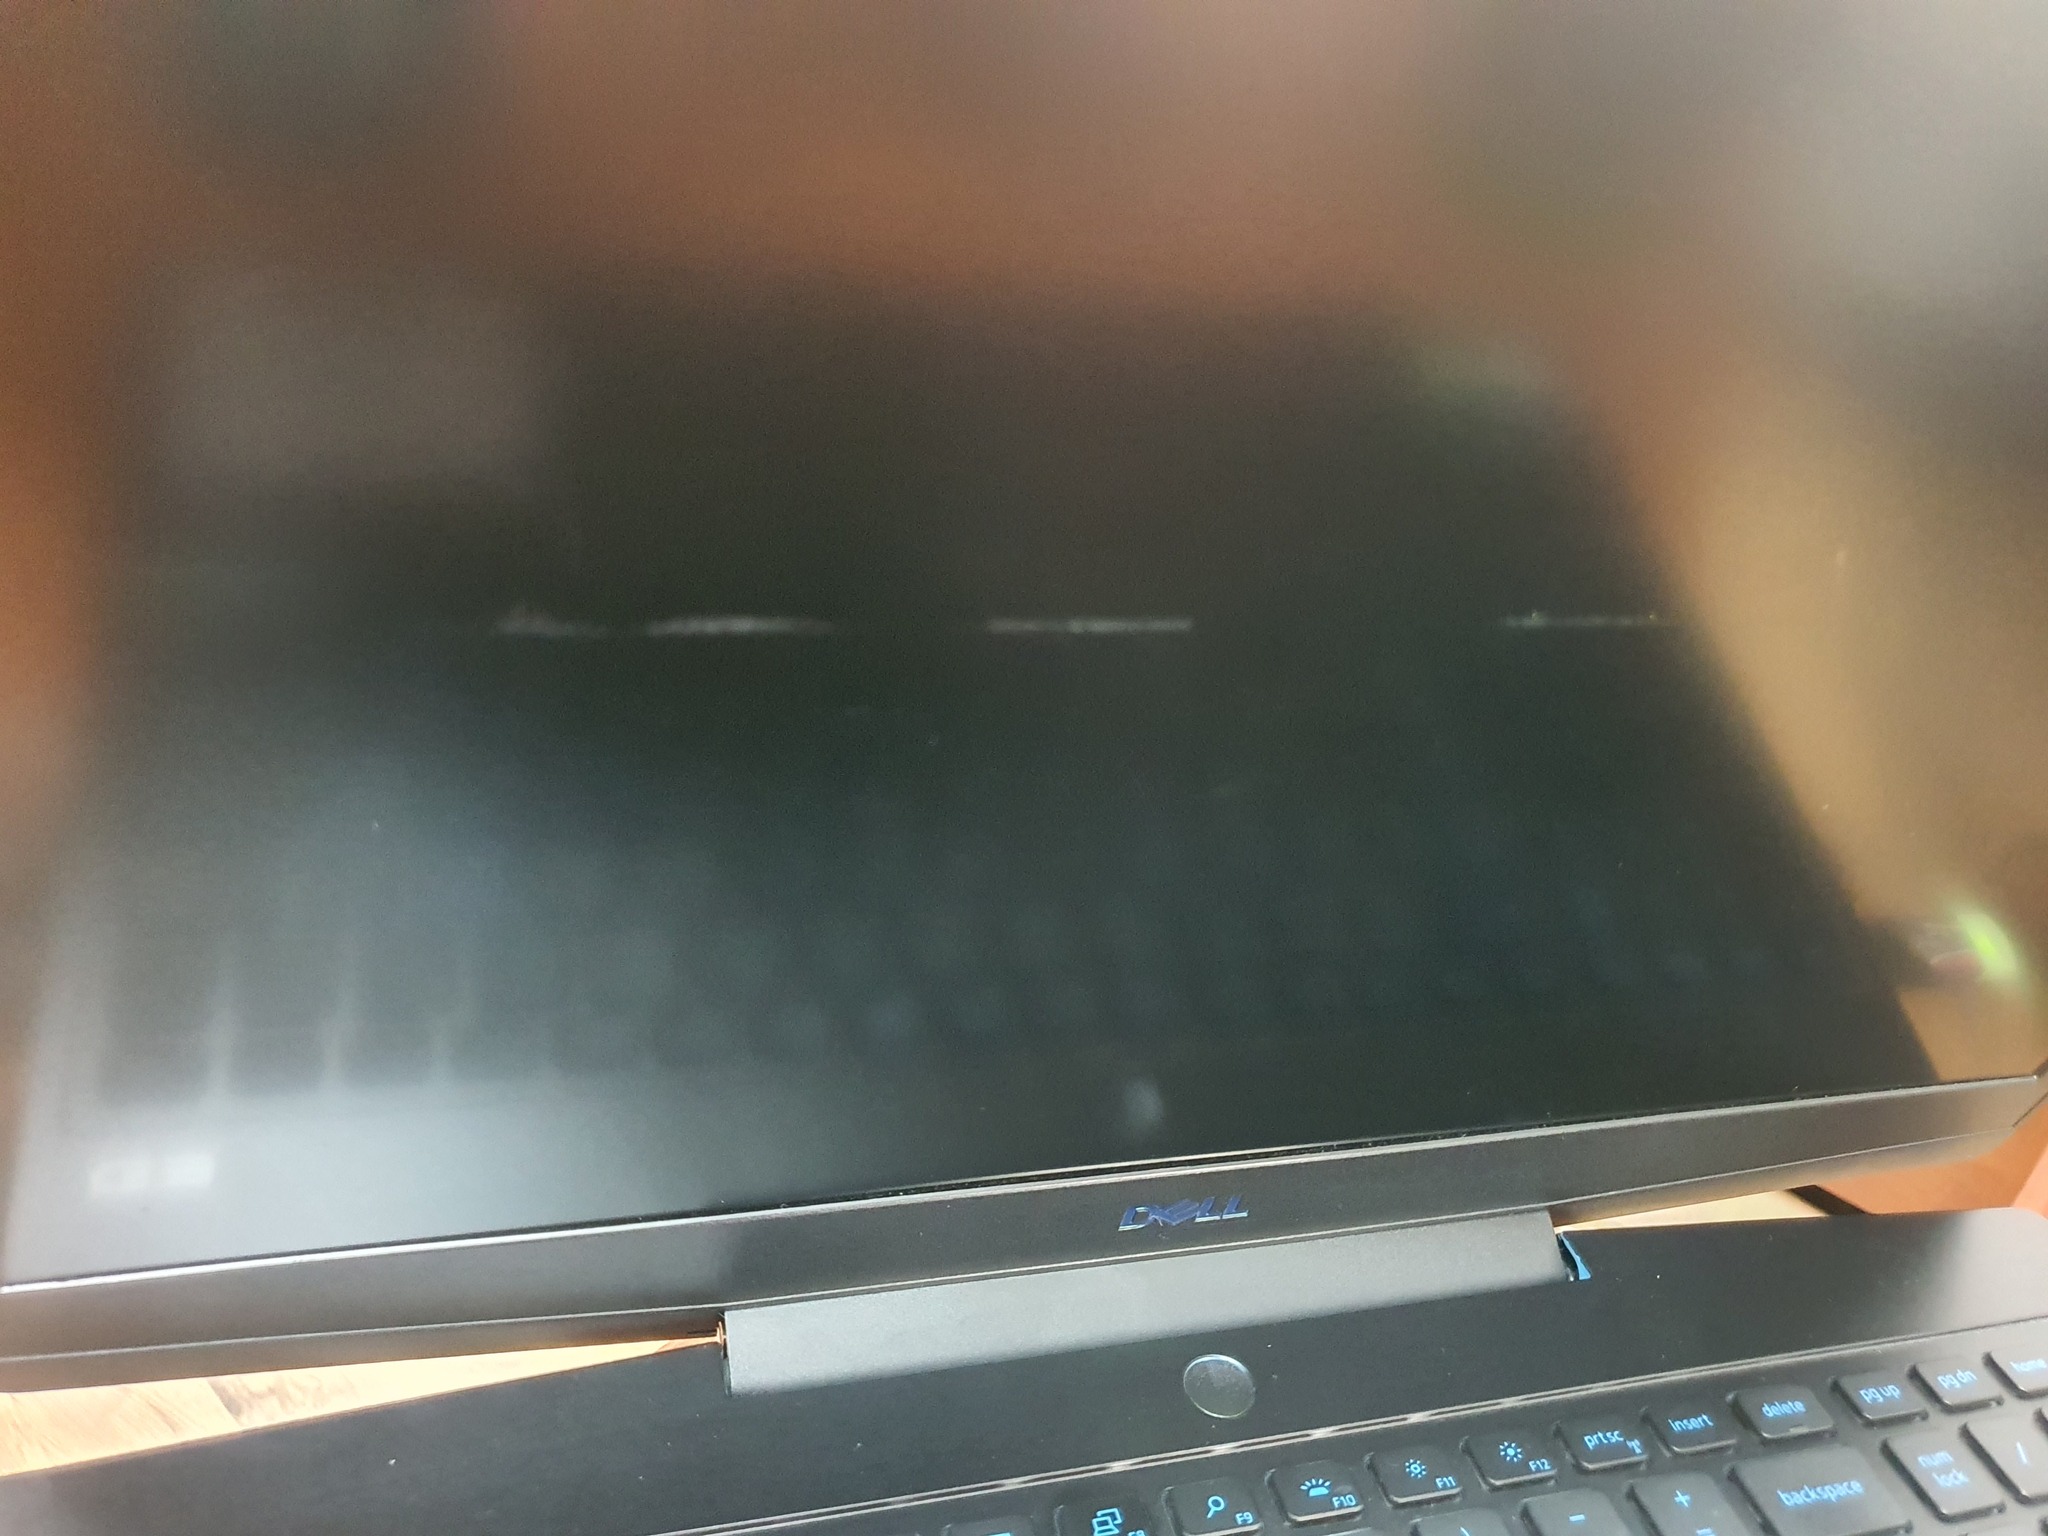 How to remove dirt from a laptop screen? - My, Dust, Dirt, Notebook, Cleaning, Purity, Help, Need advice